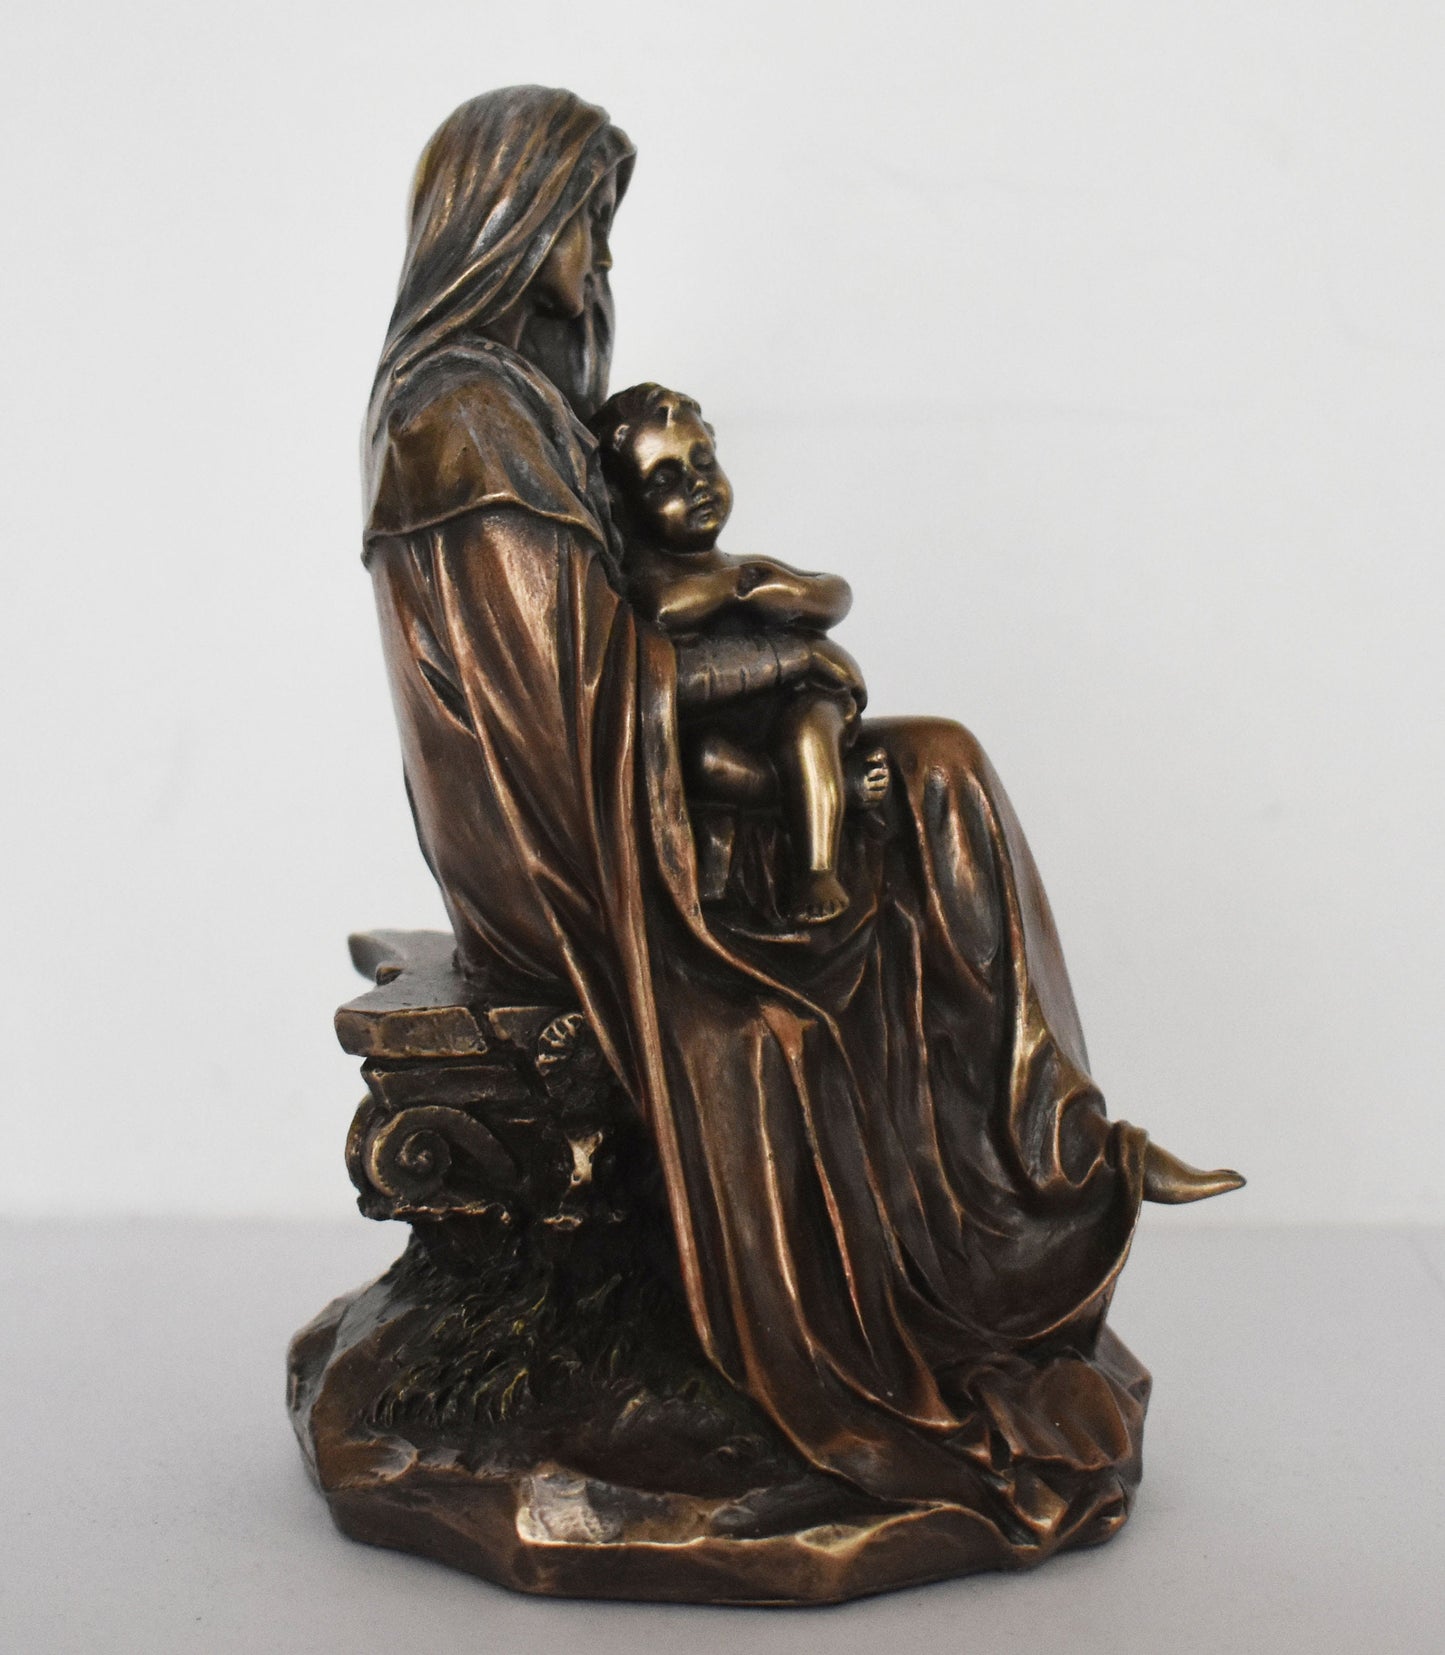 Virgin Mary Hugging Baby Jesus - Blessed Mother - Christianity - Cold Cast Bronze Resin